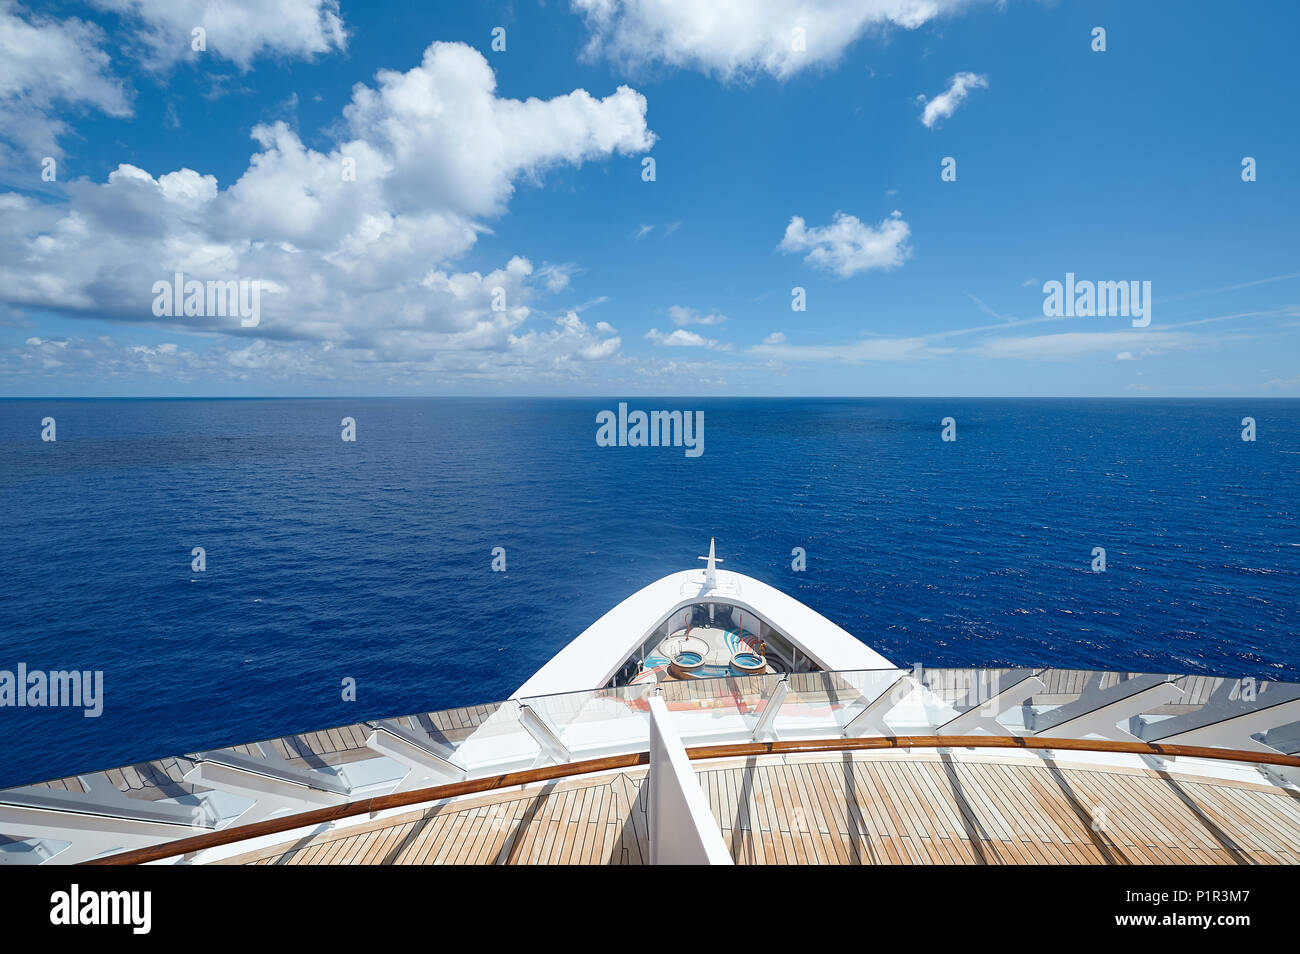 Seascape view from ship open deck on sunny day Stock Photo